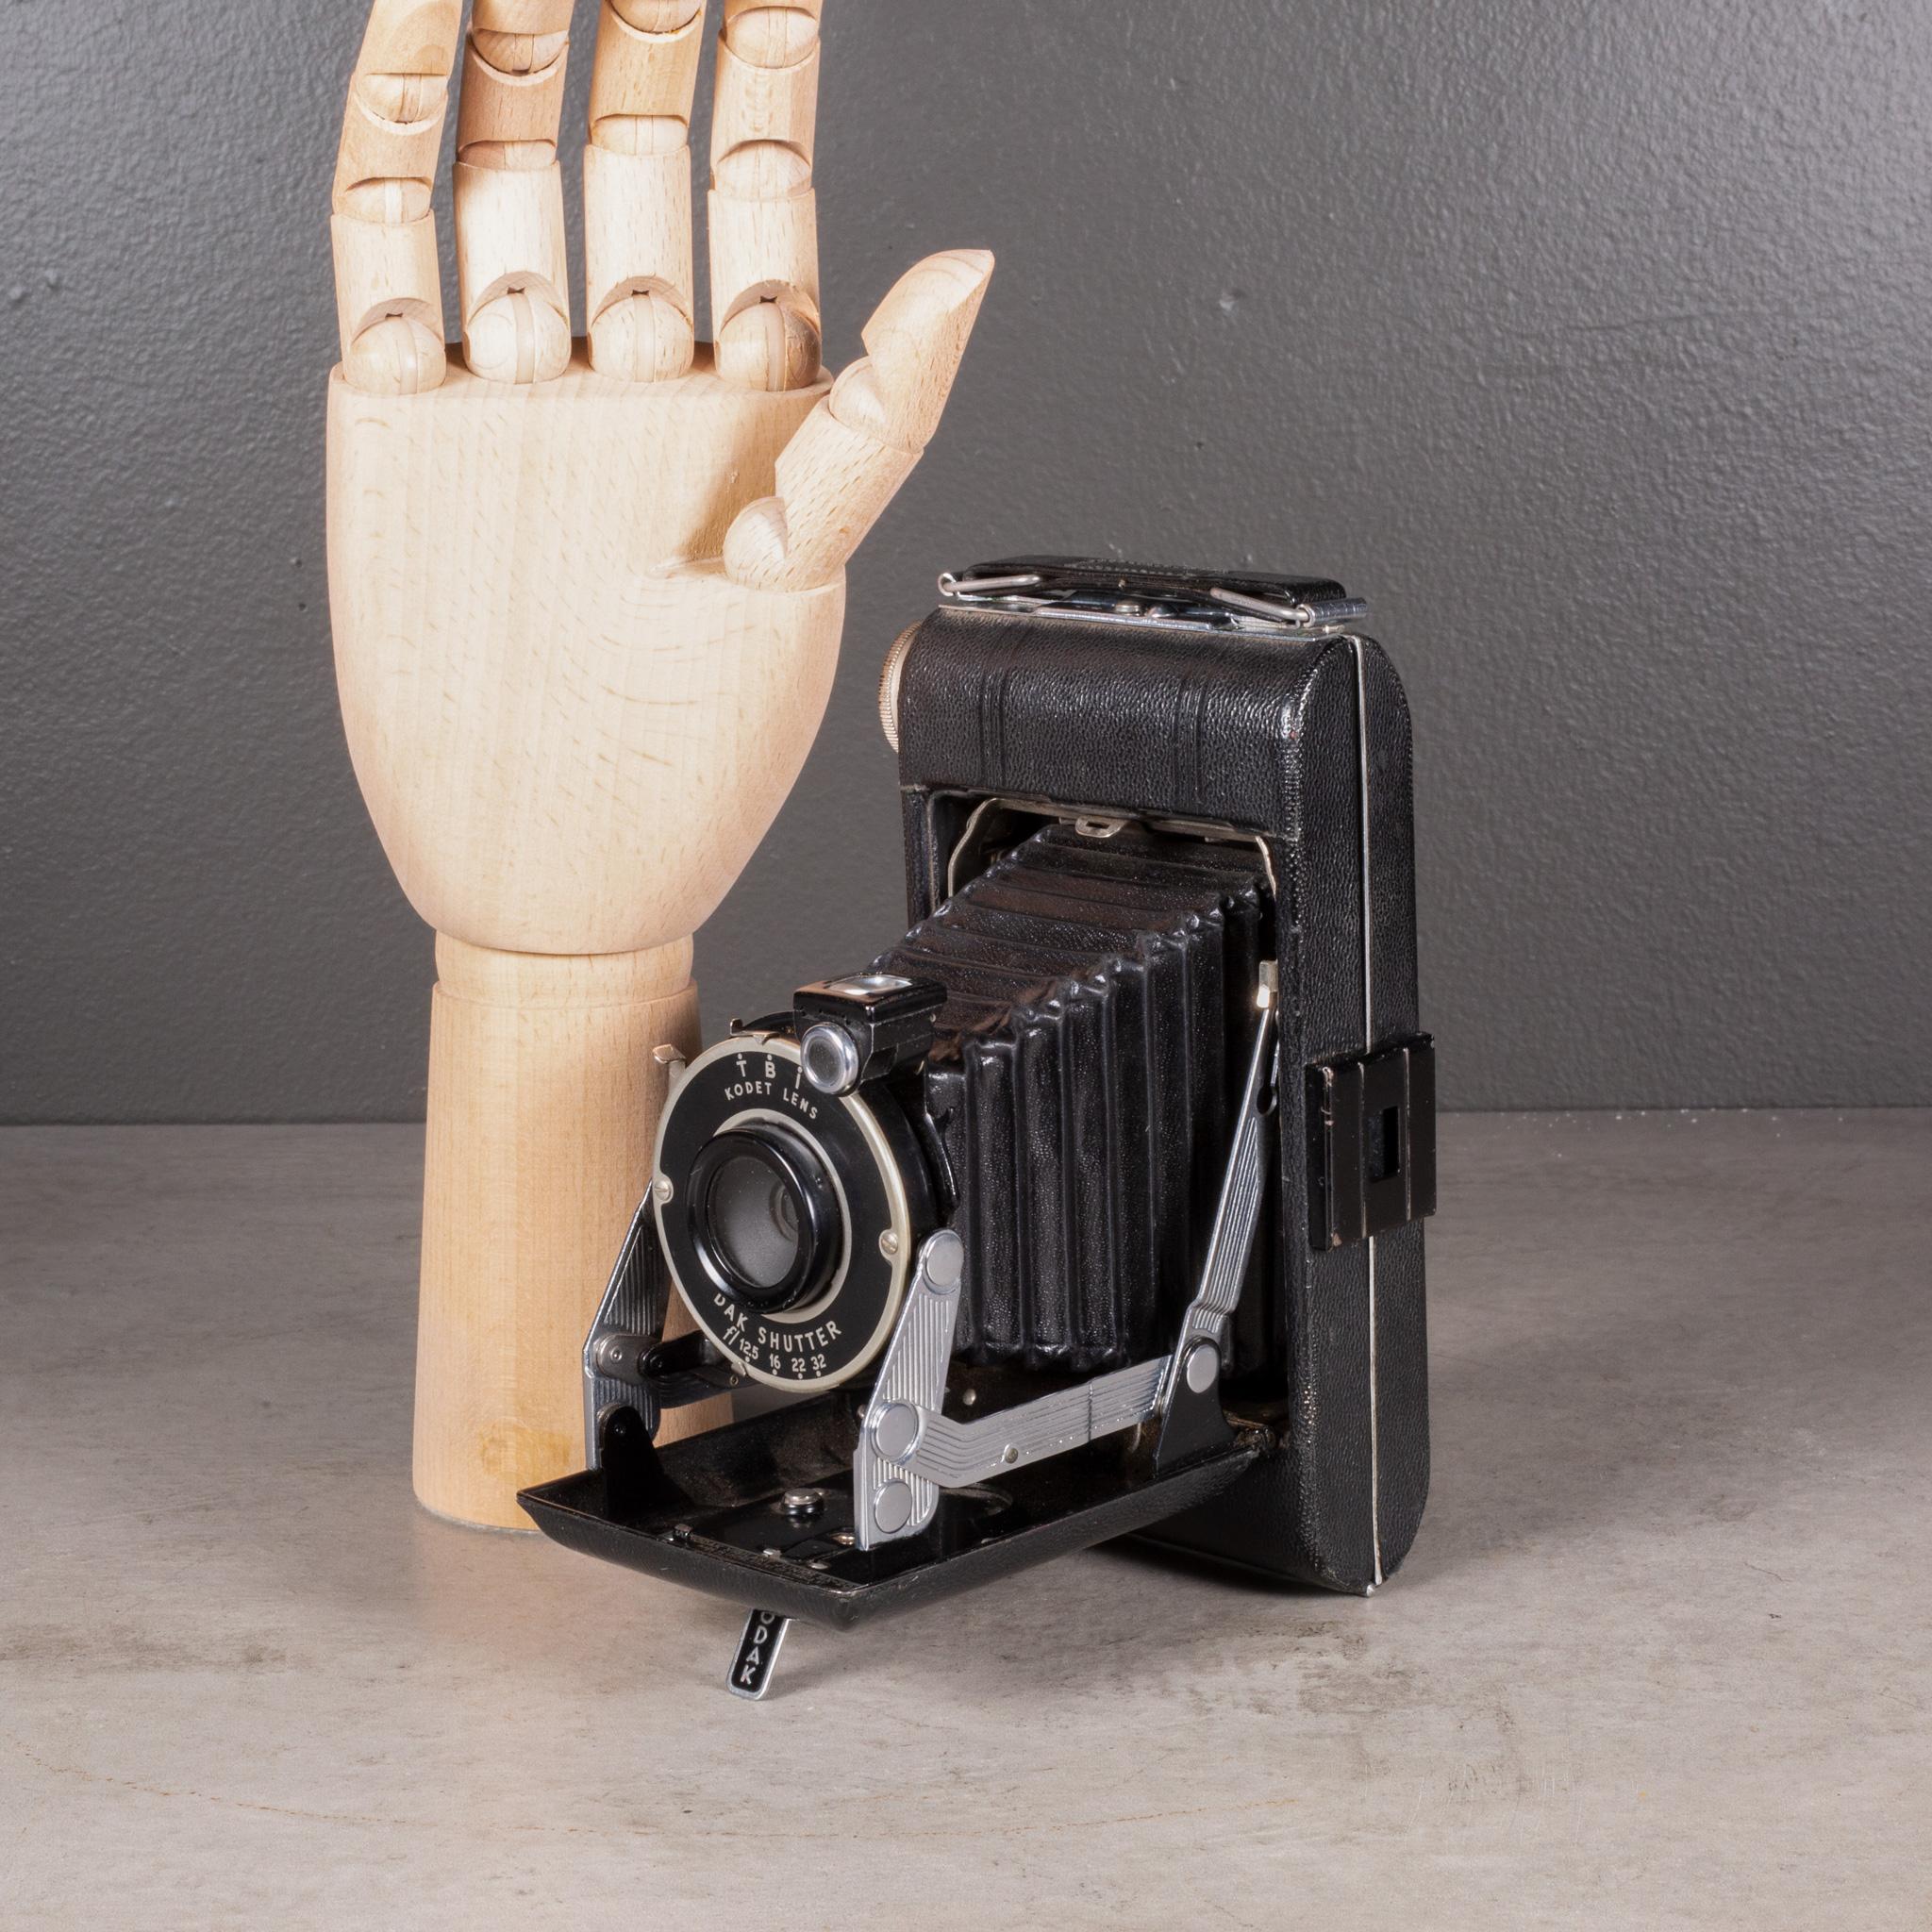 ABOUT

An Art Deco Kodak Vigilante Junior Six-20 Folding Camera with a leather wrapped body, chrome accents and flip out view finder. Folds neatly to 1.5 inches.

Shown with life size hand.

    CREATOR Eastman Kodak Co.
    DATE OF MANUFACTURE